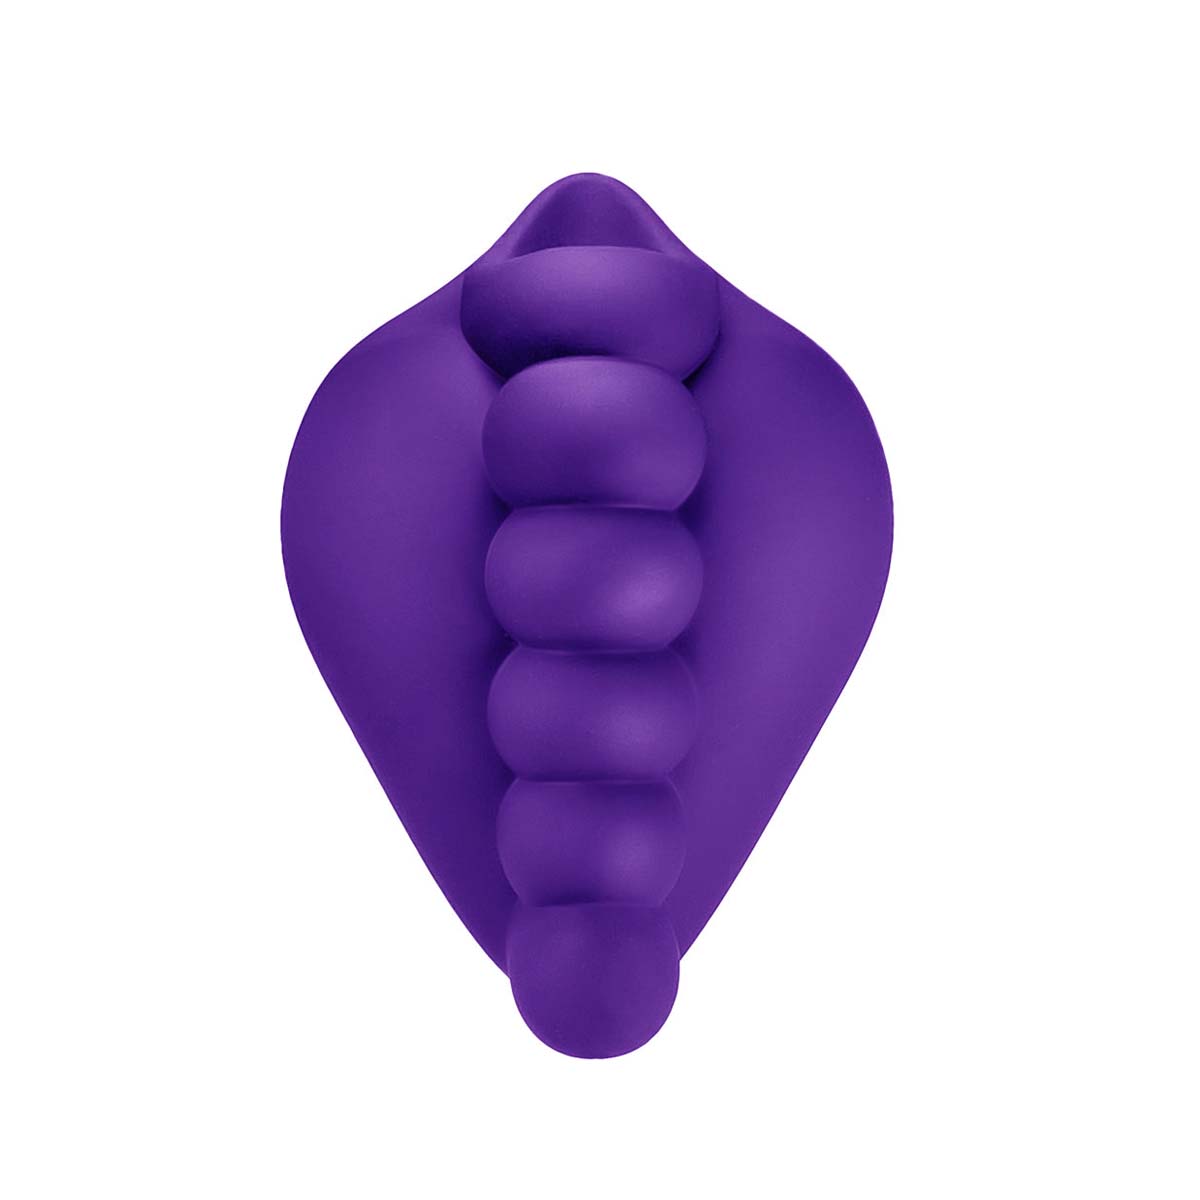 Purple silicone stimulating cushion with bumps for dildo Nudie Co